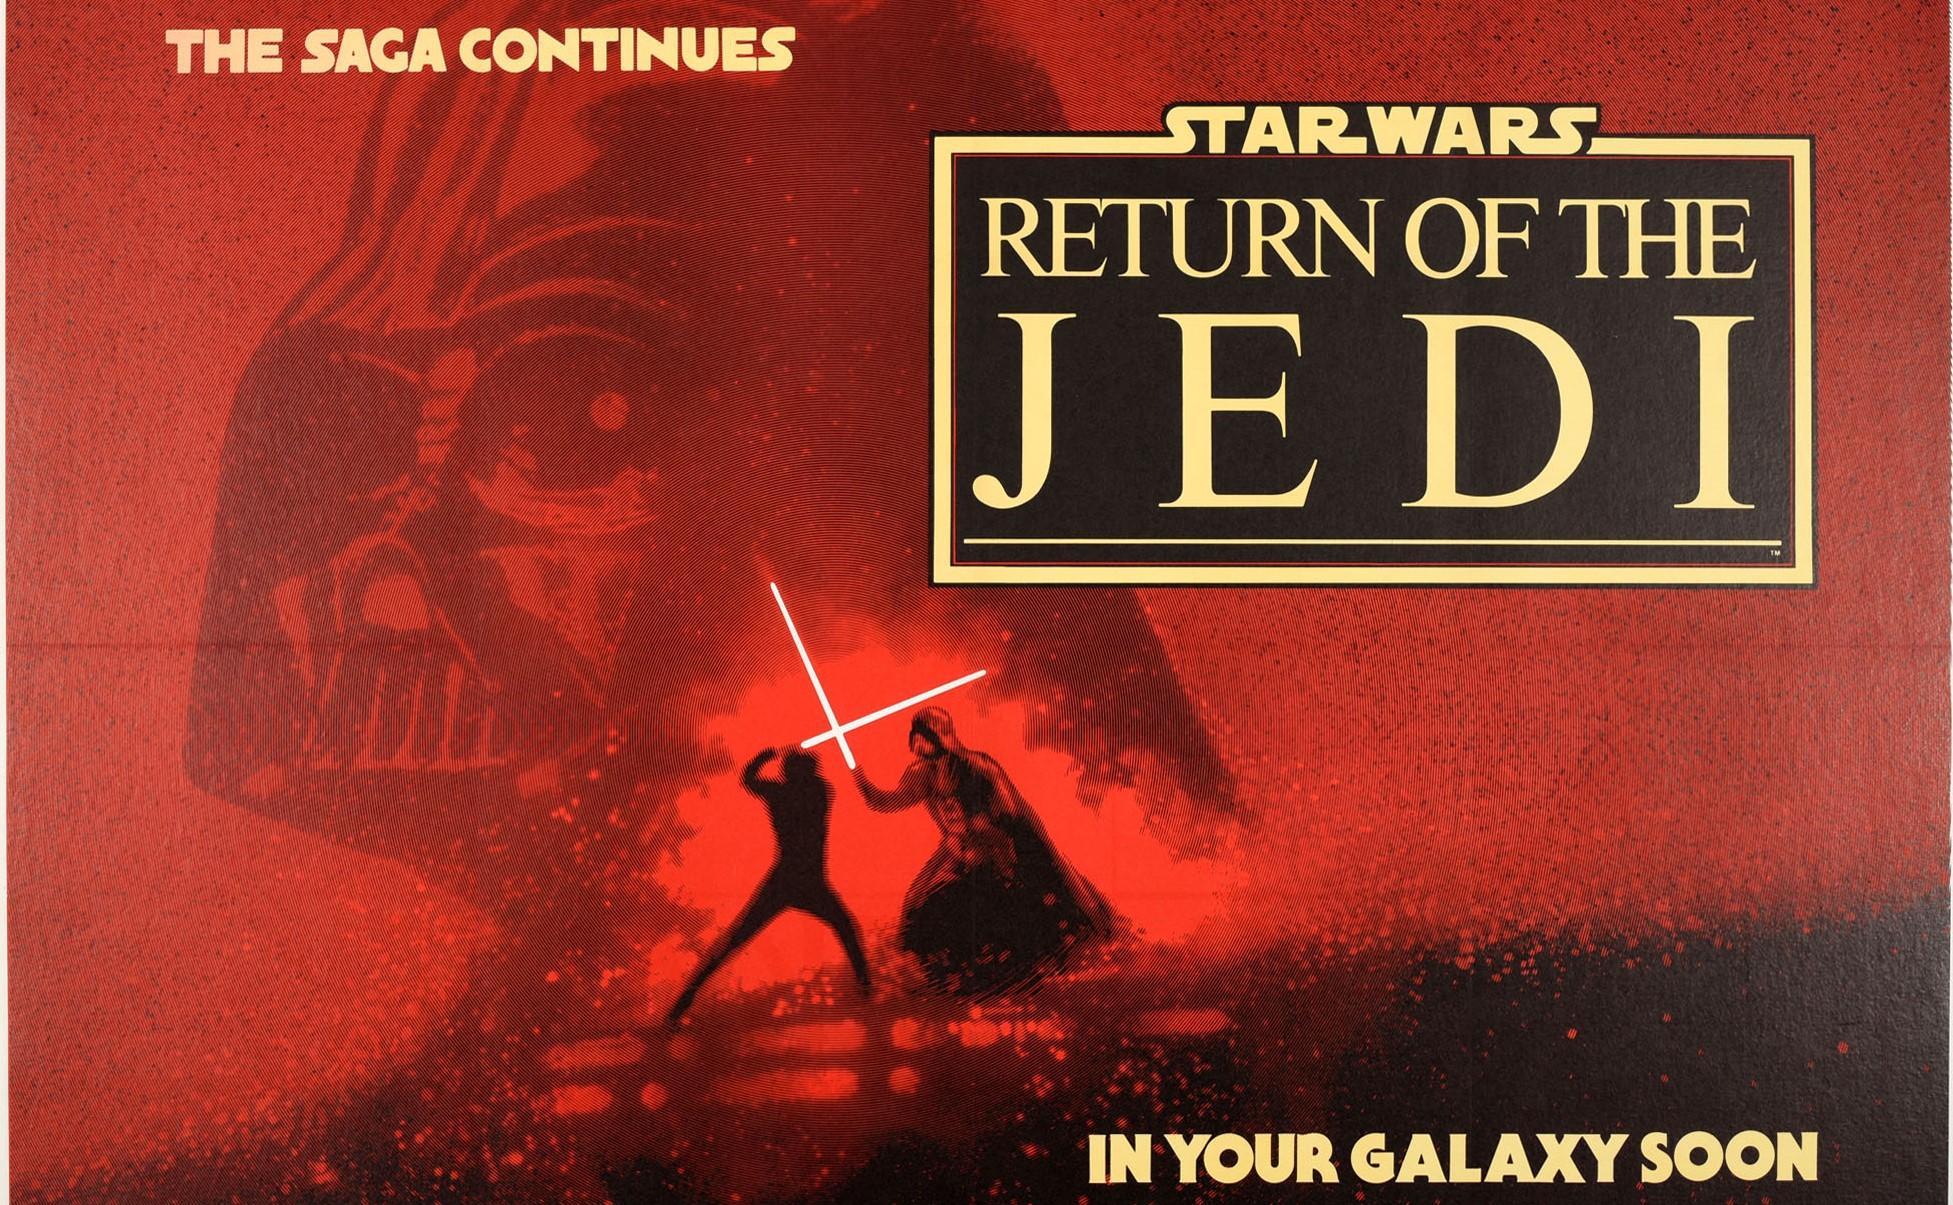 Original vintage teaser movie poster for the Classic film by George Lucas - Star Wars: Episode VI The Return of the Jedi - directed by Richard Marquand and starring Mark Hamill as Luke Skywalker, Harrison Ford as Han Solo, Peter Mayhew as Chewbacca,